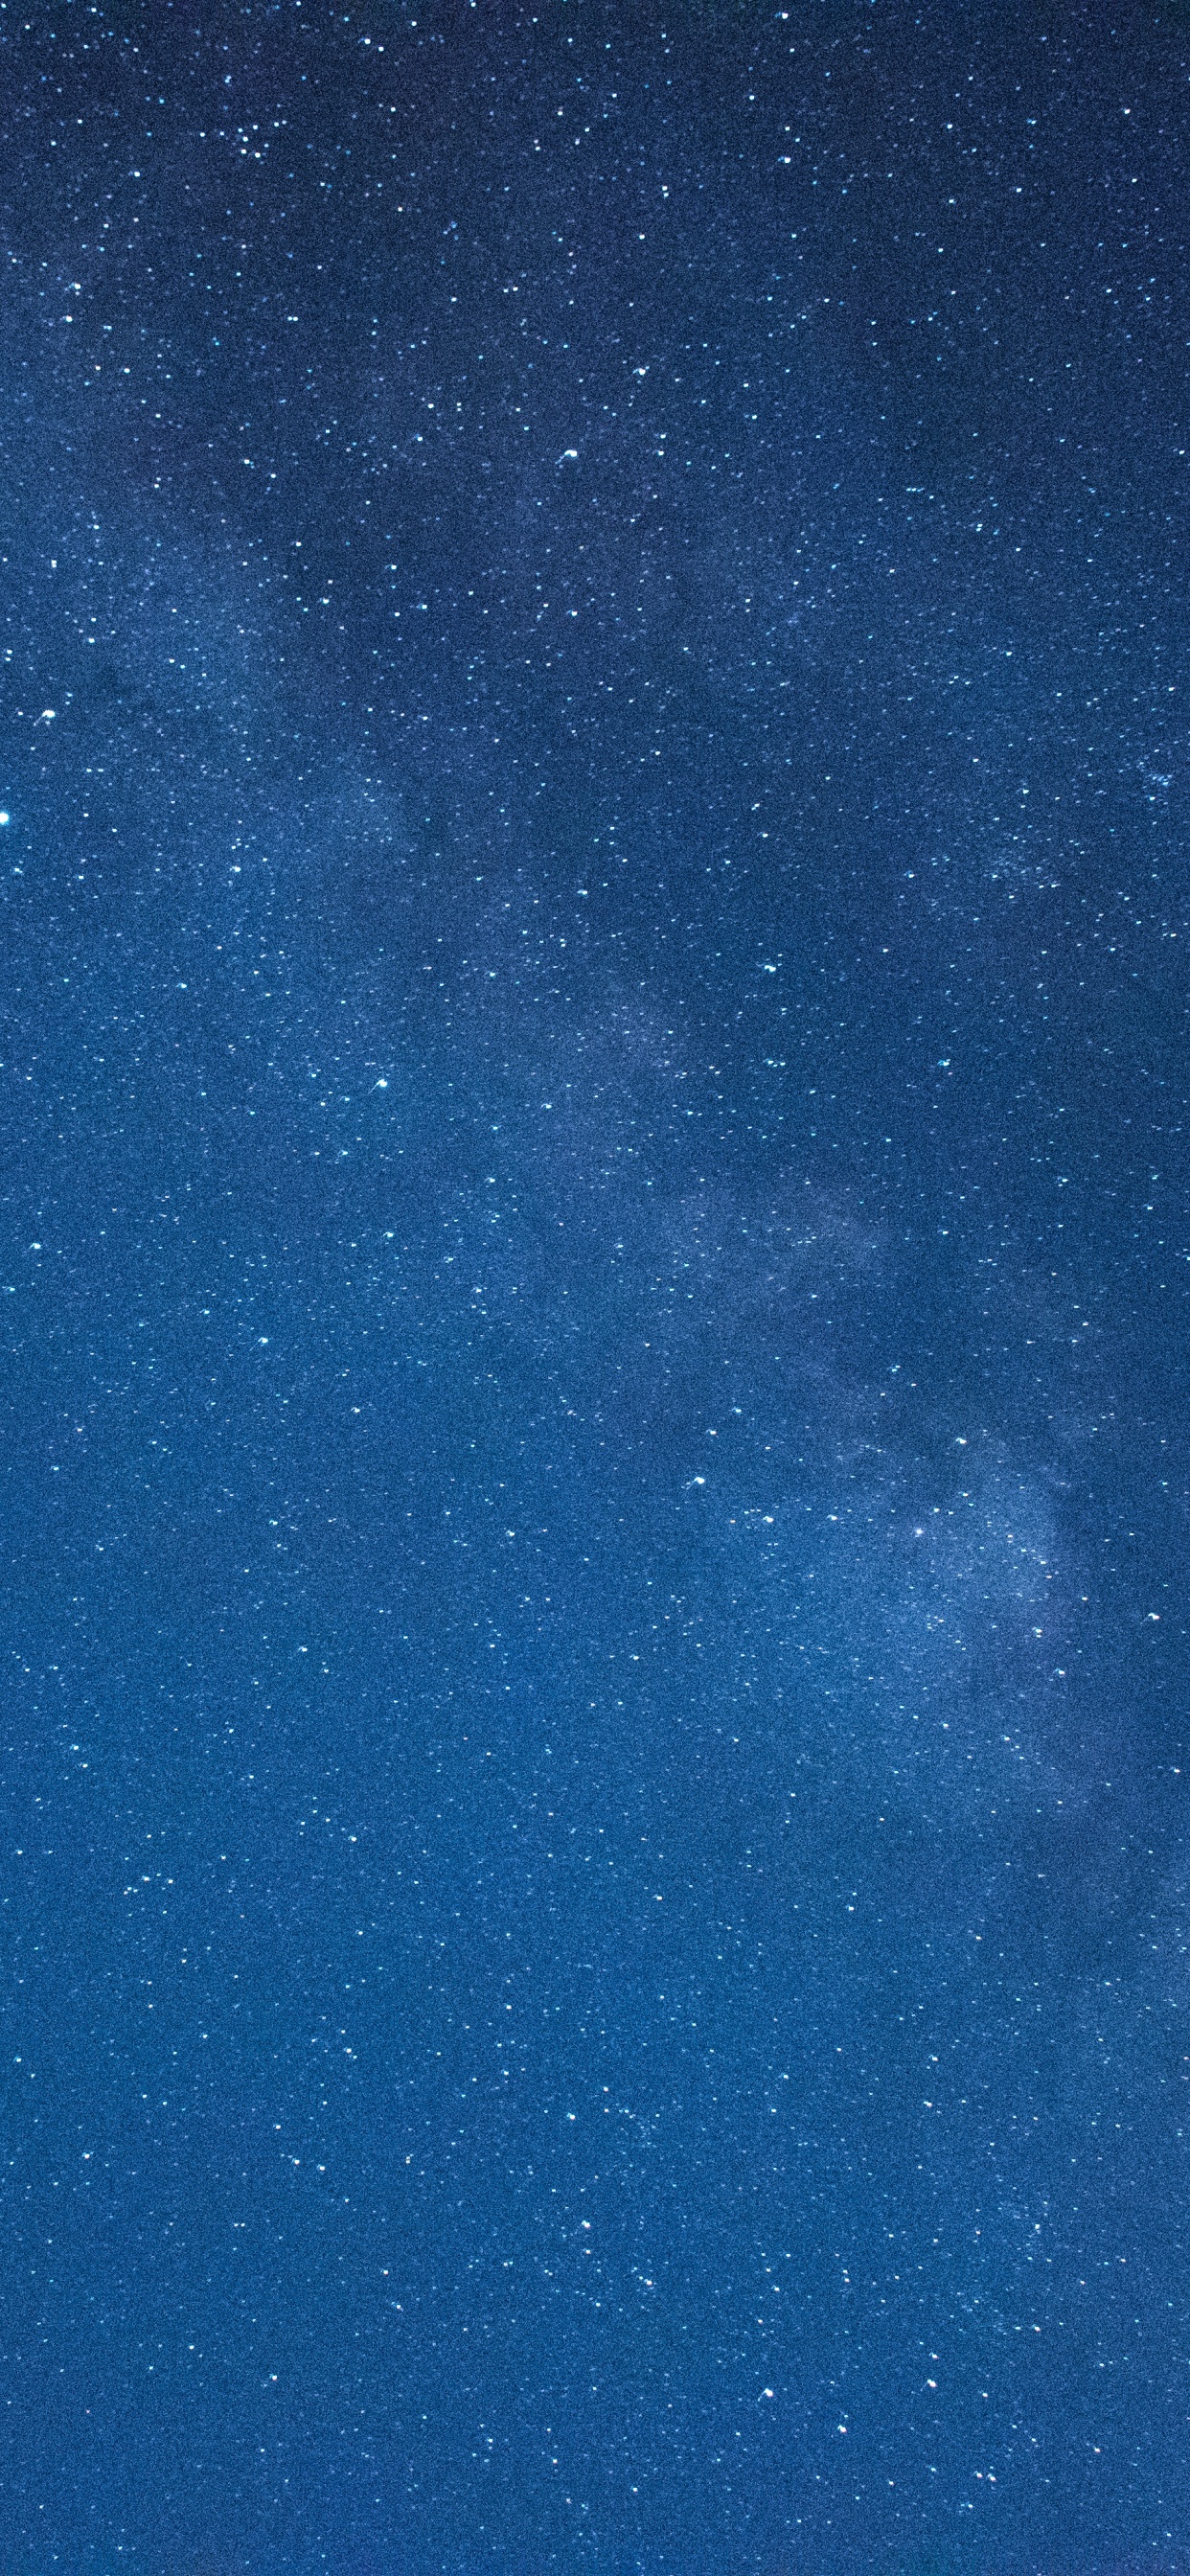 Blue Sky With Stars During Night Time. Wallpaper in 1242x2688 Resolution